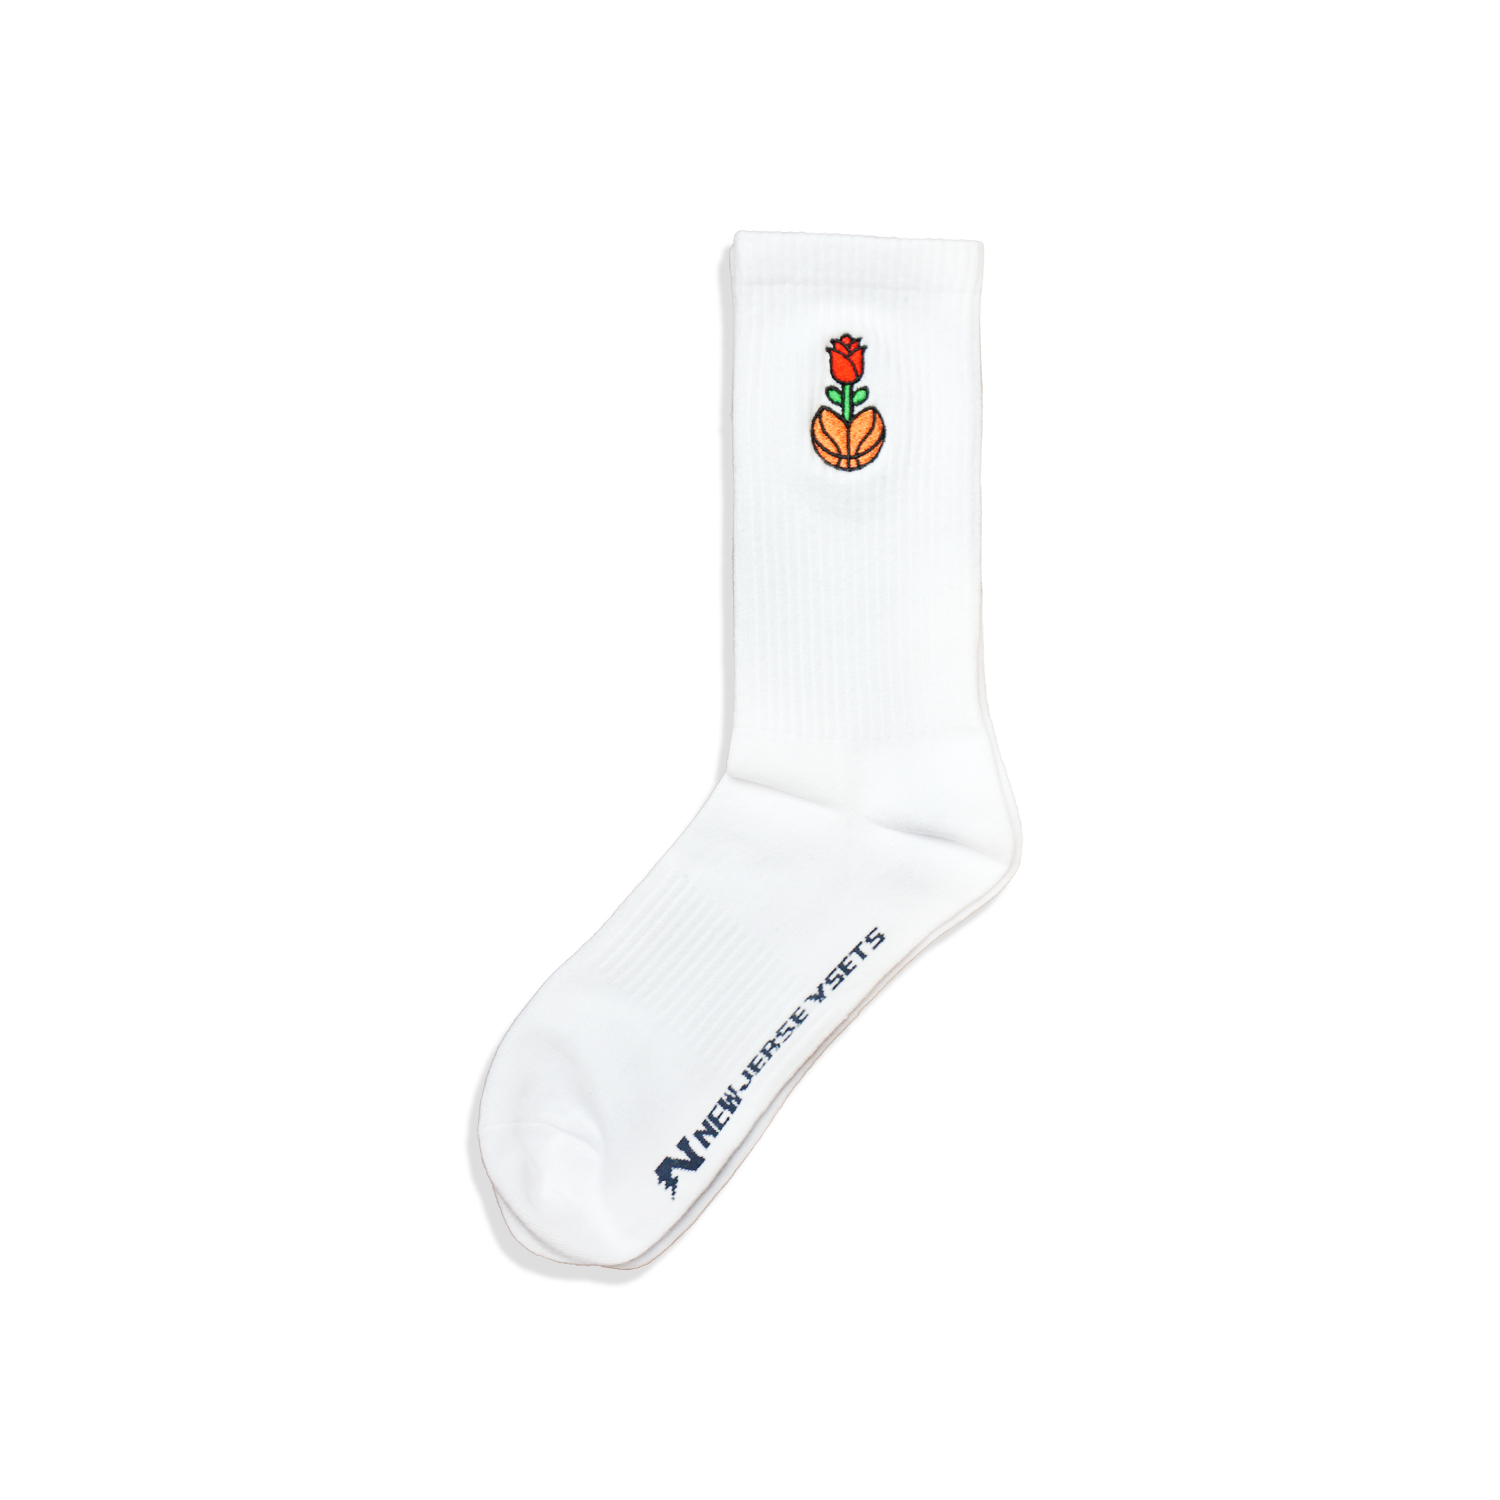 Rose Up In The Game - Embroidered Socks - White